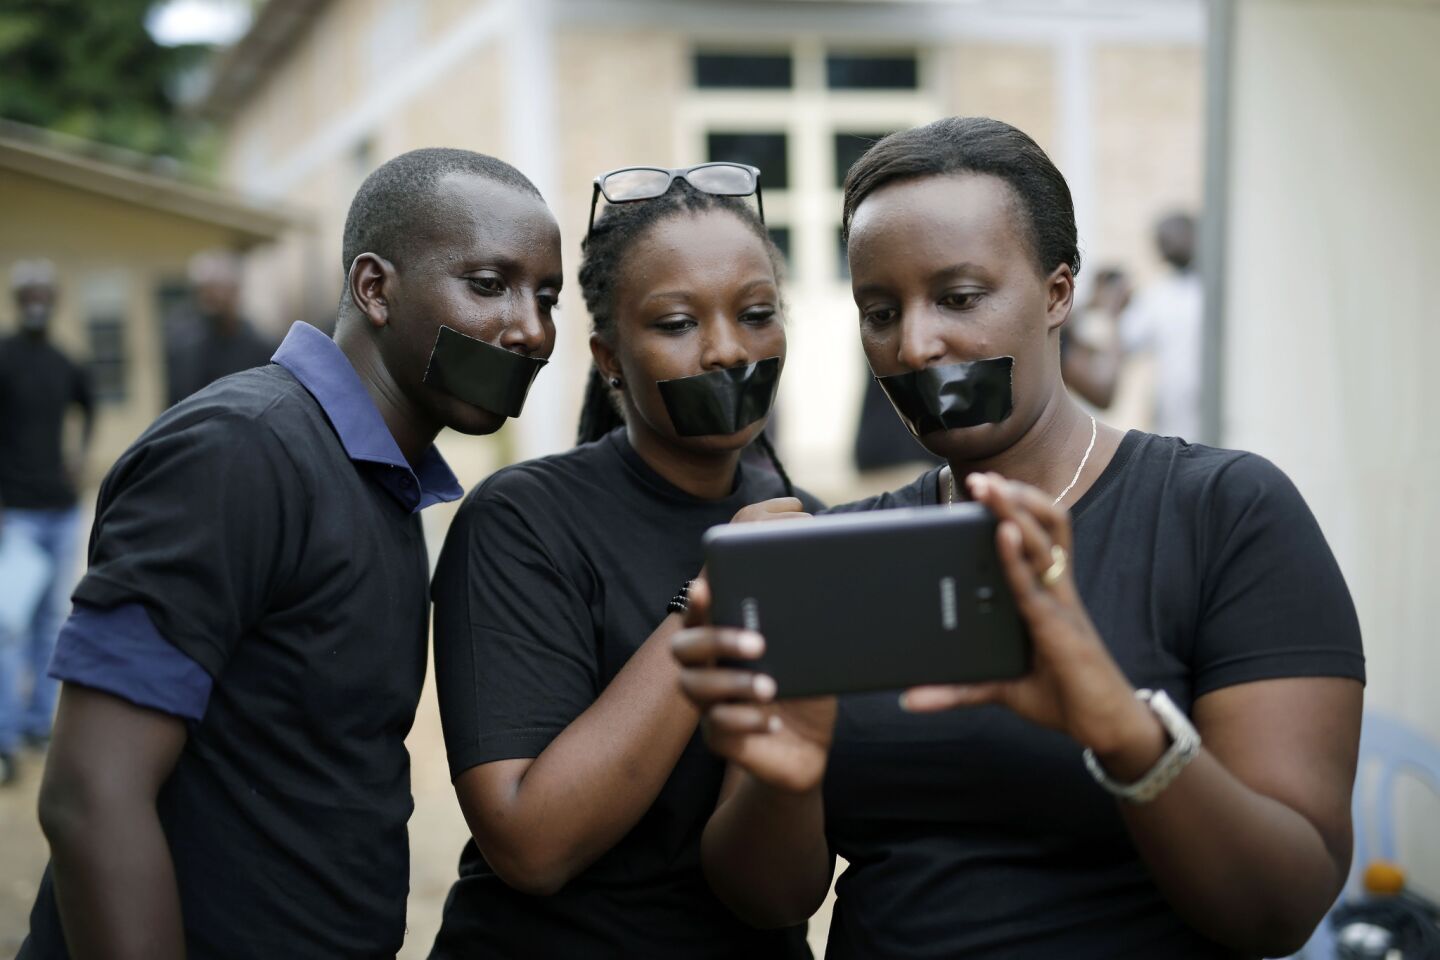 Journalists with tape on their mouths gather May 3 to honor World Press Freedom Day in Bujumbura. In the wake of demonstrations protesting against the move by President Pierre Nkurunziza to seek a third term, the government shut down access to some social networks and closed a private radio station.